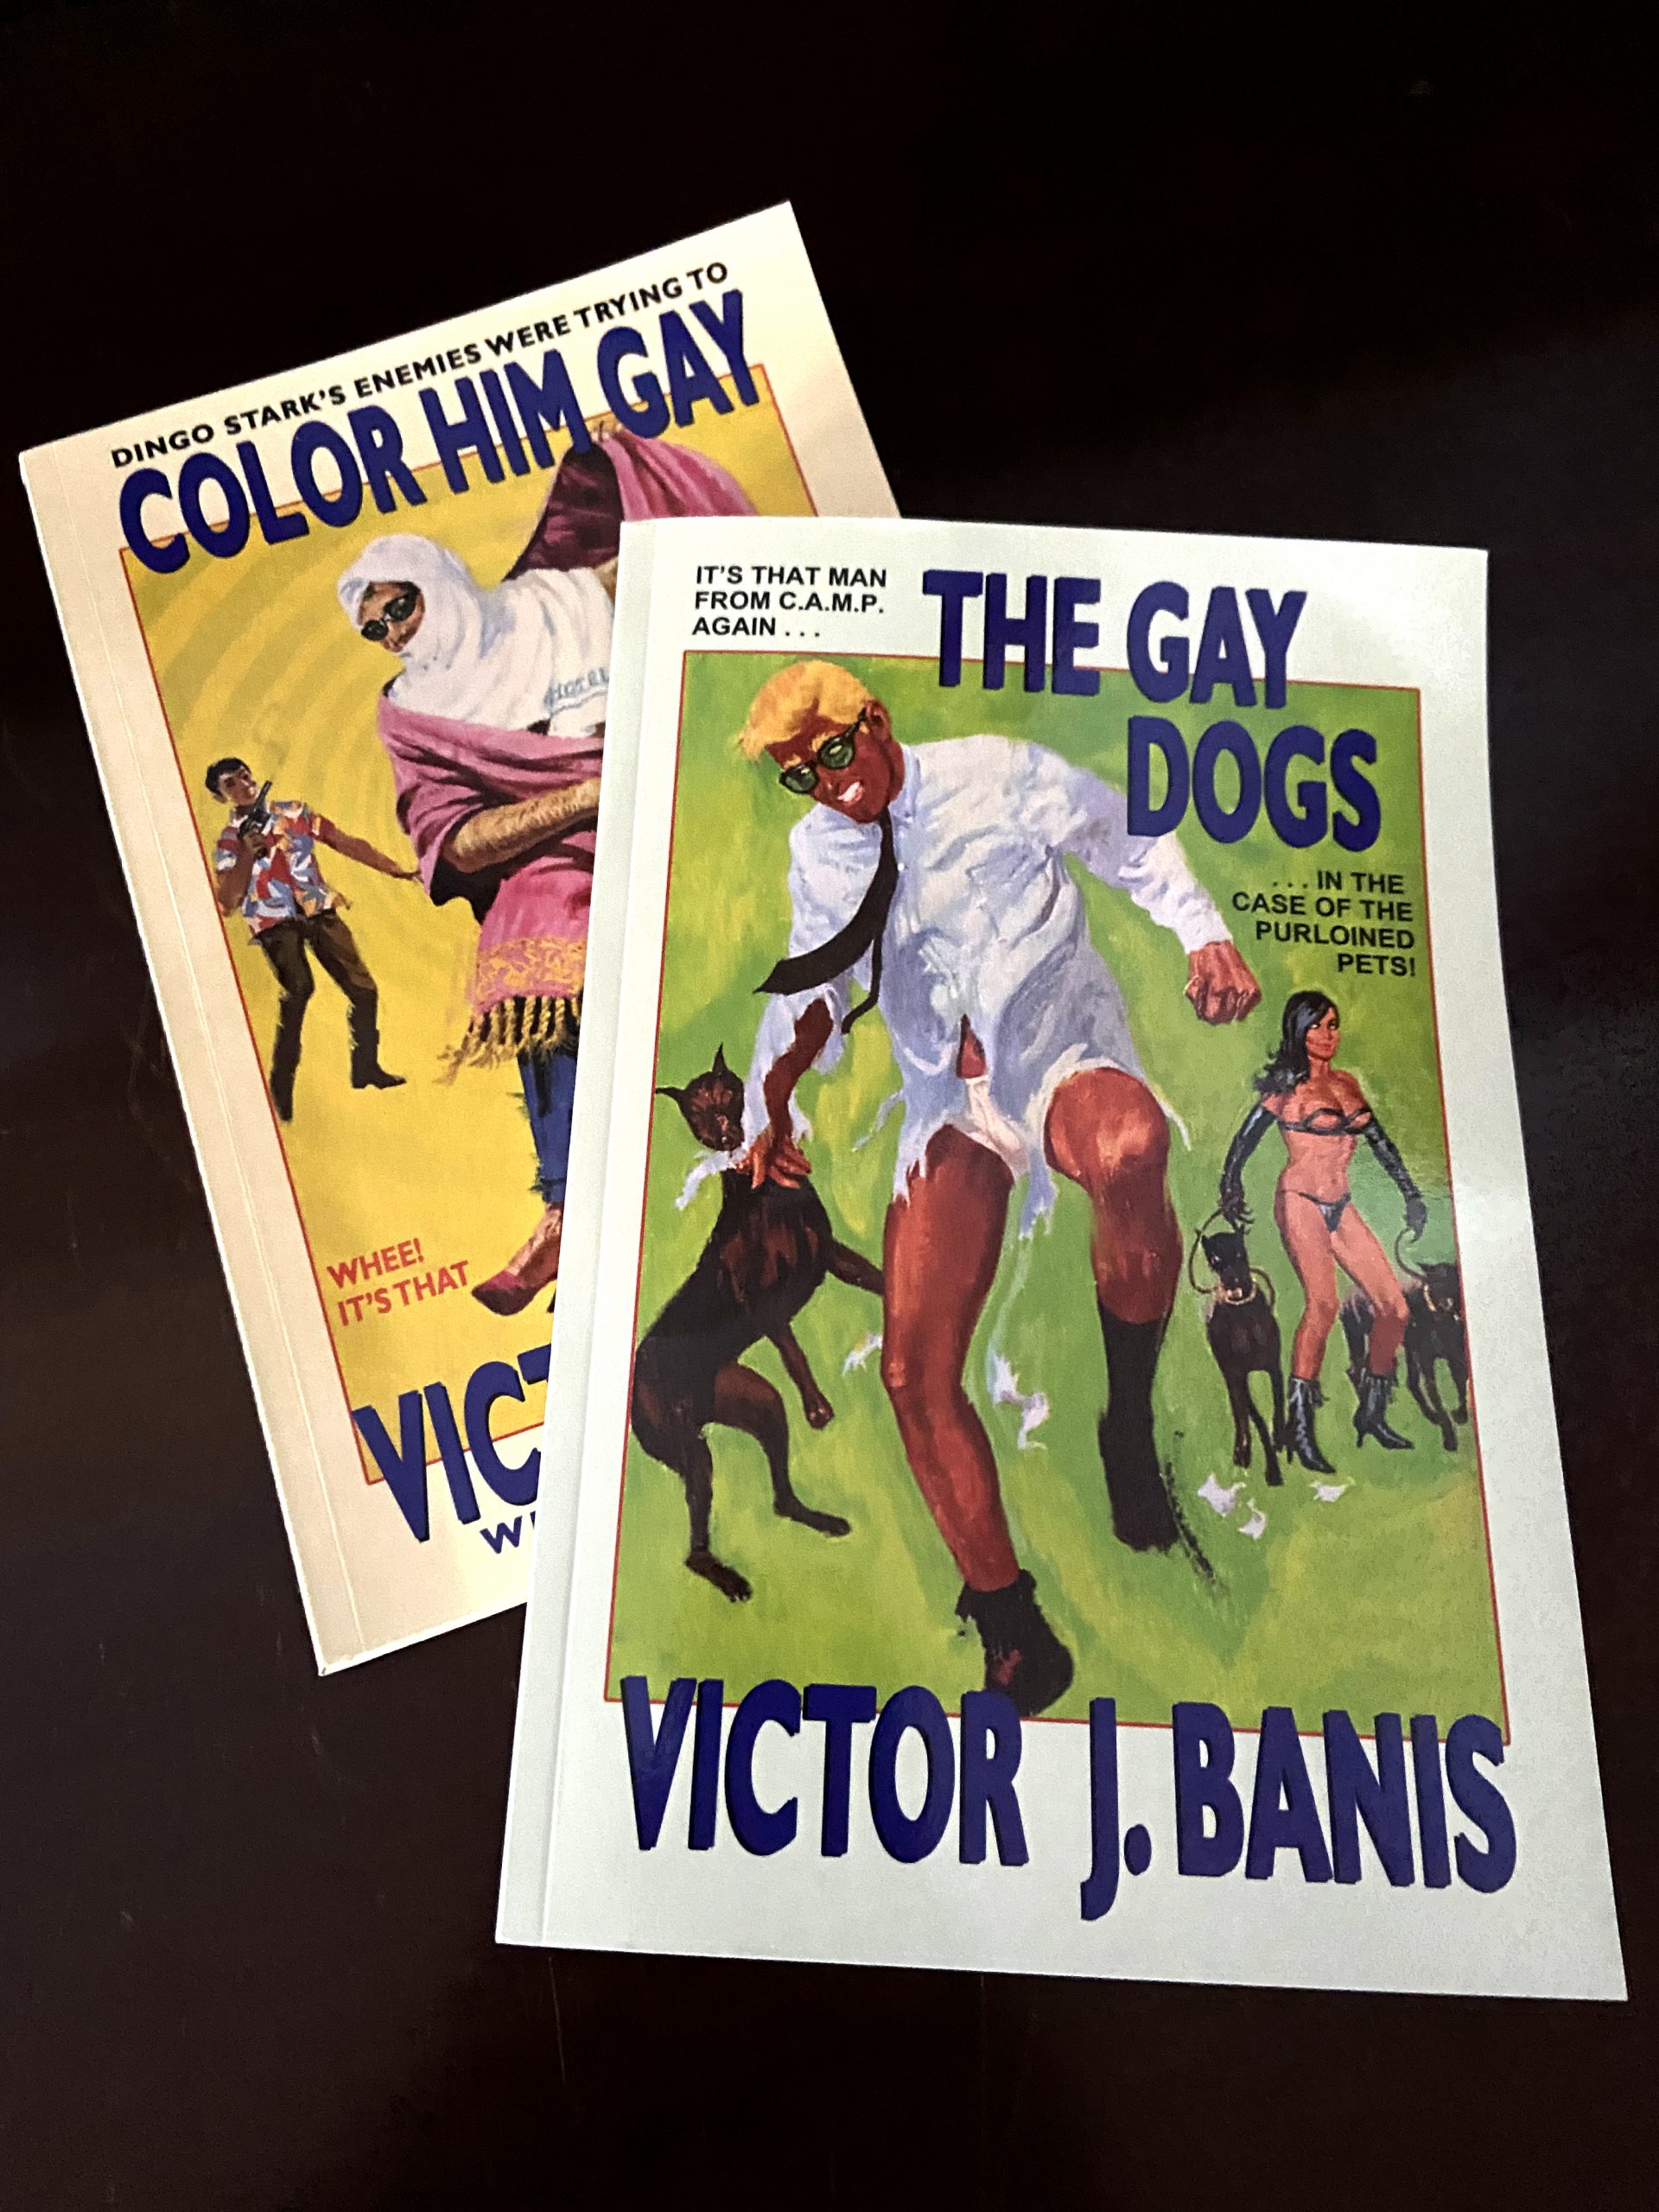 Old books with half-dressed men and women on the covers.